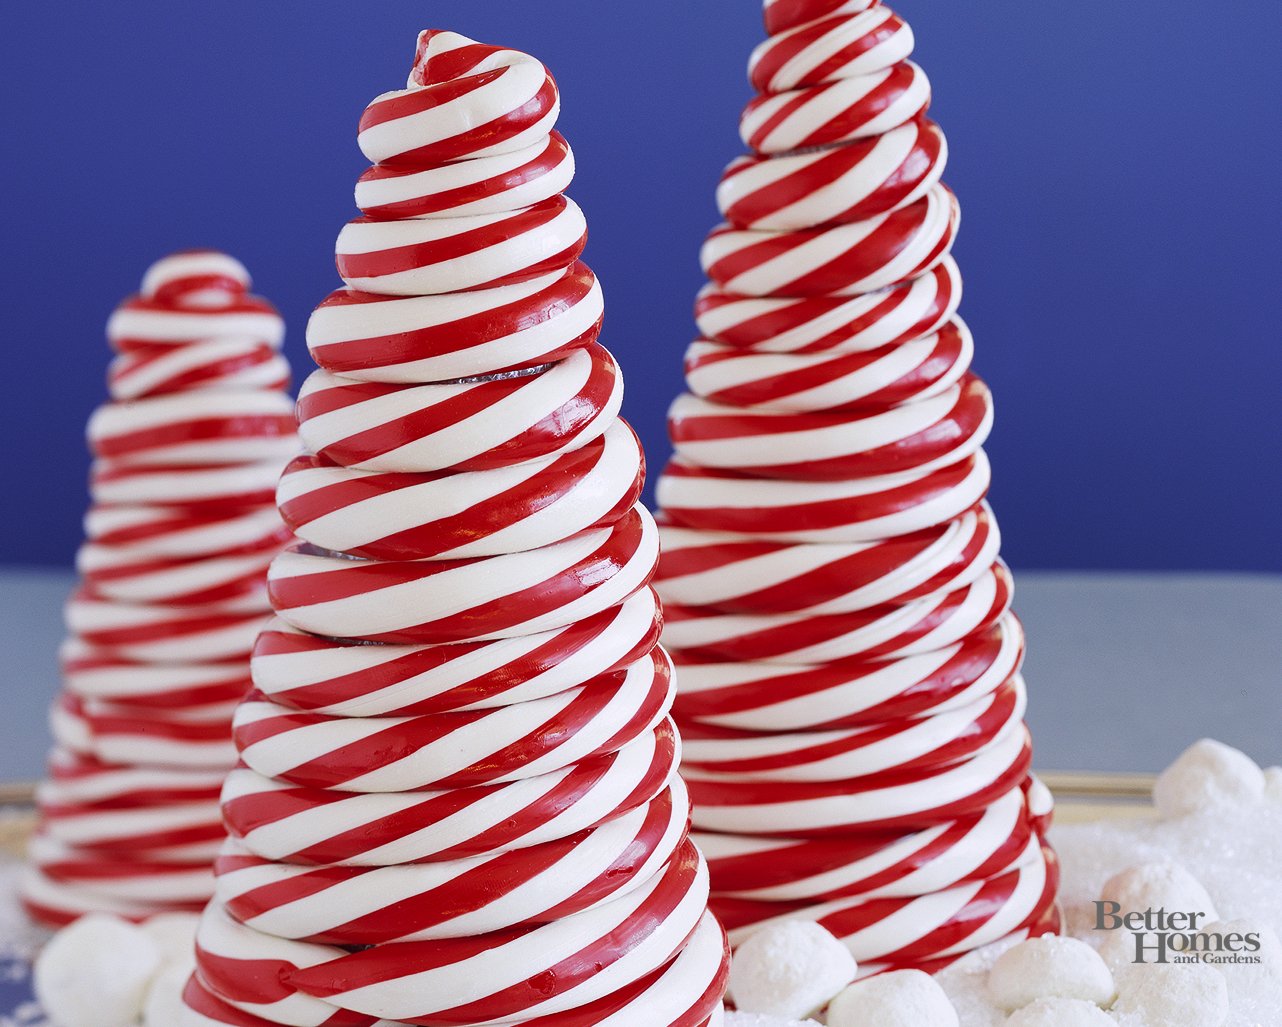 Christmas Candy Canes Wallpaper Candy cane tree 1282x1027